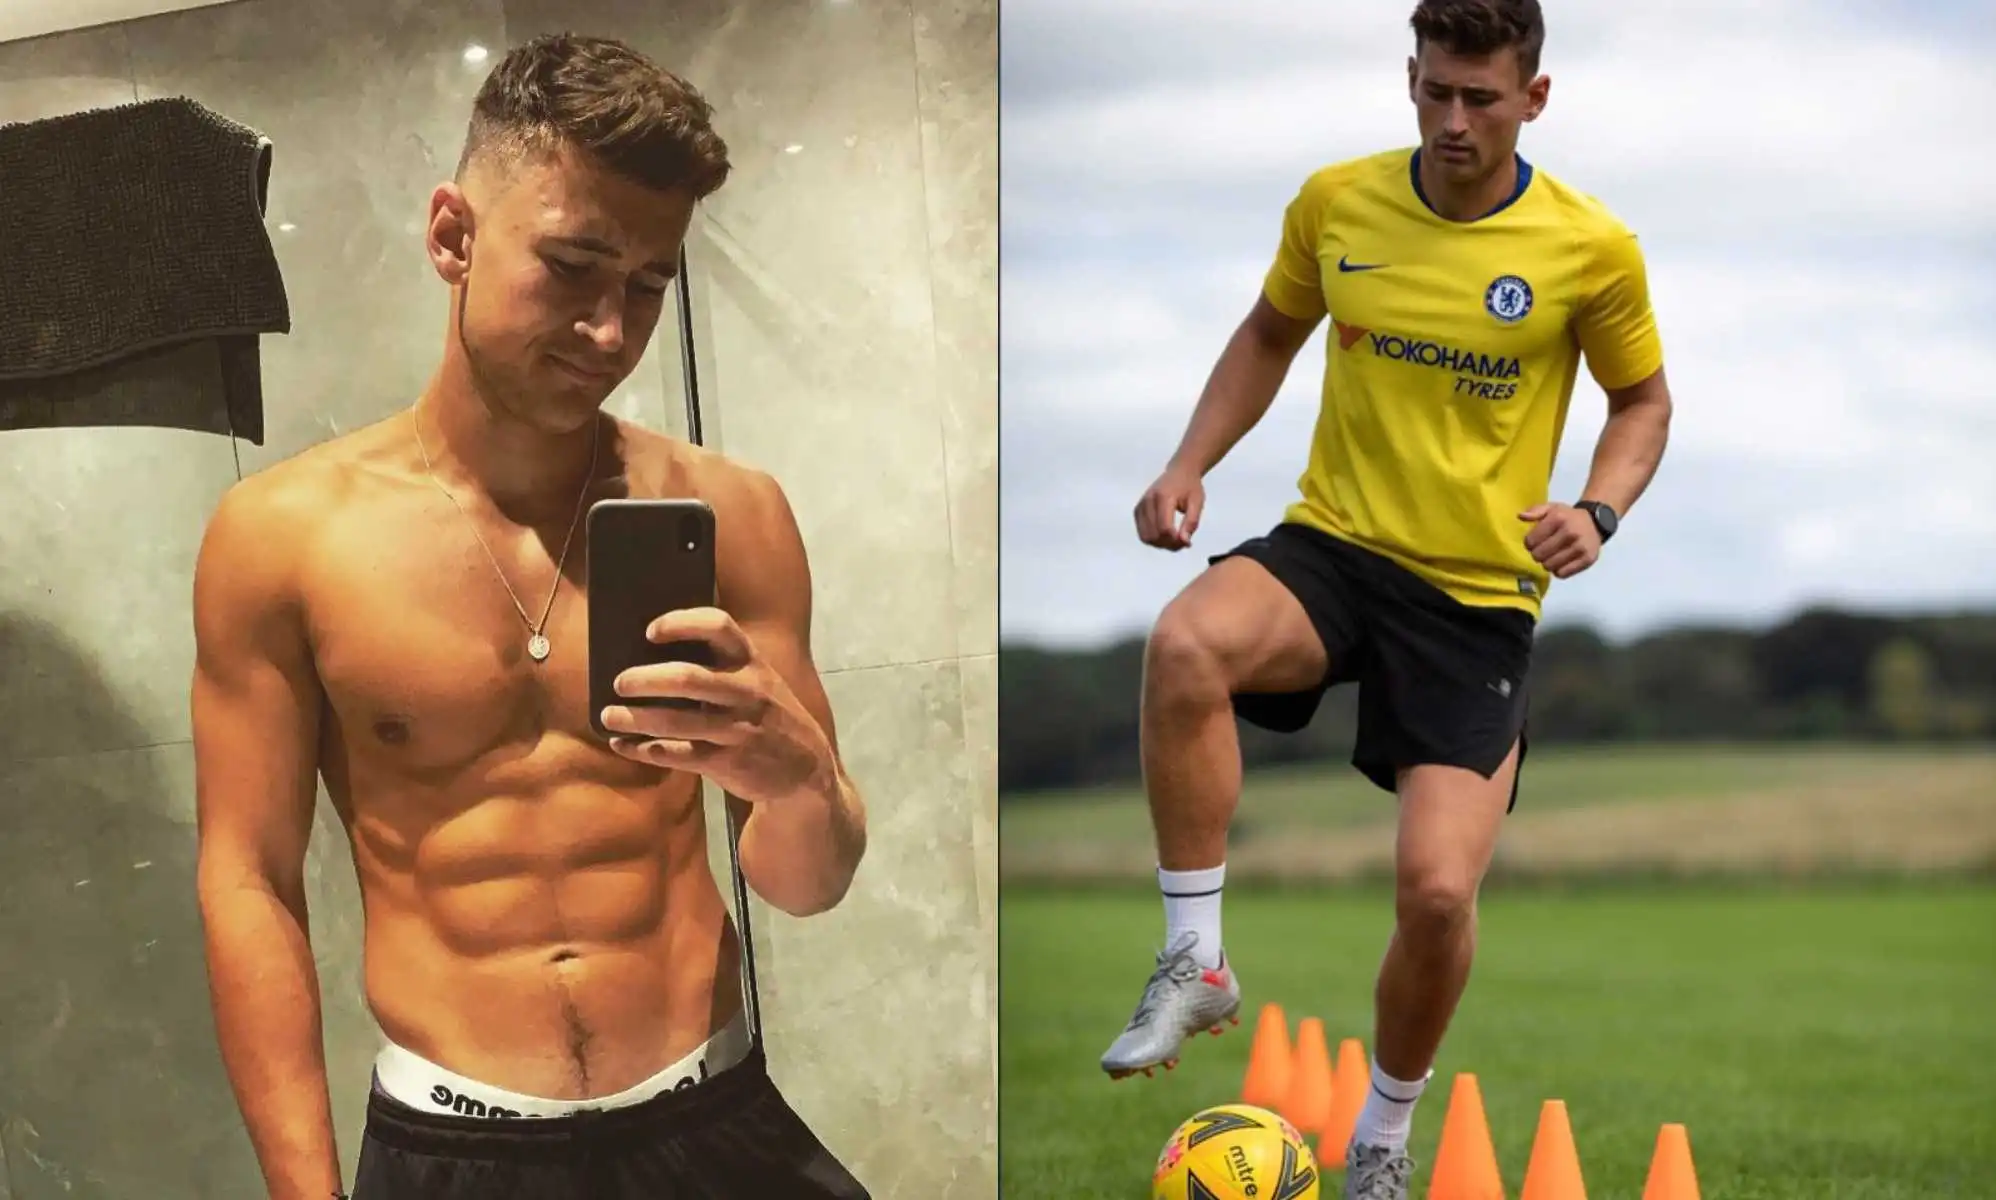 Footballer Jake Williamson on being frozen out of his team for being gay